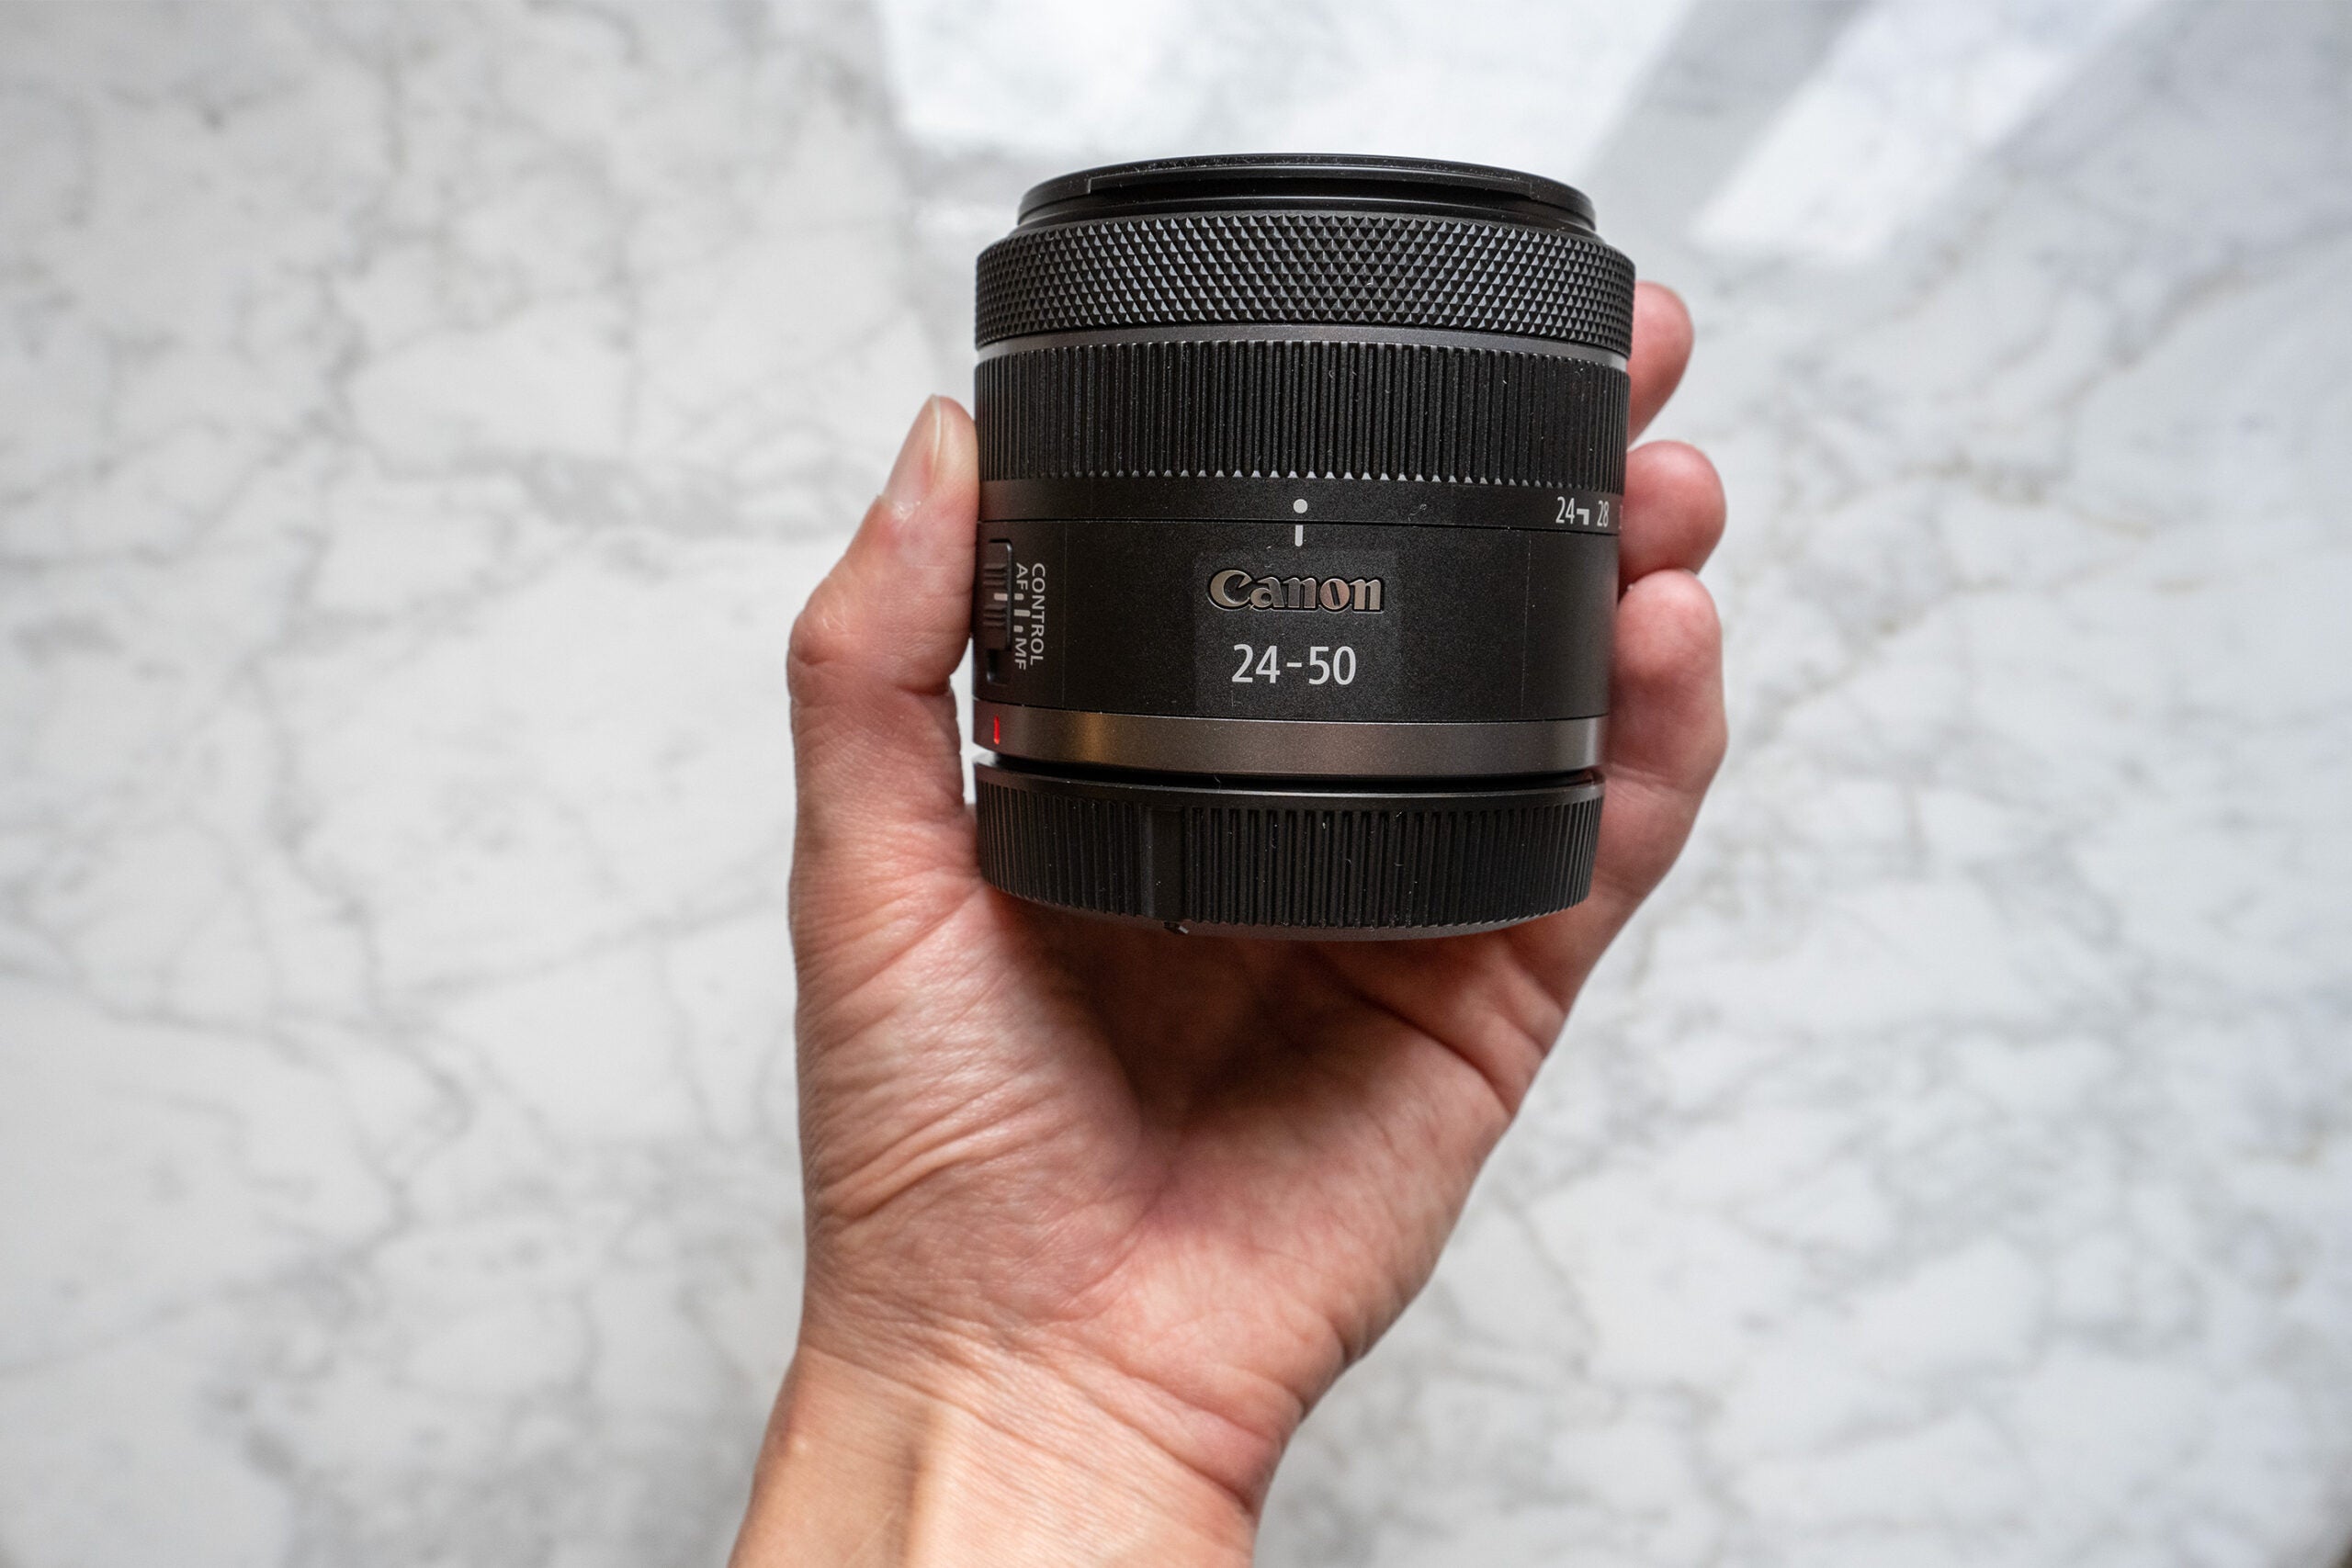 Hands-on with the Canon RF24-50mm F4.5-6.3 IS STM lens | Popular